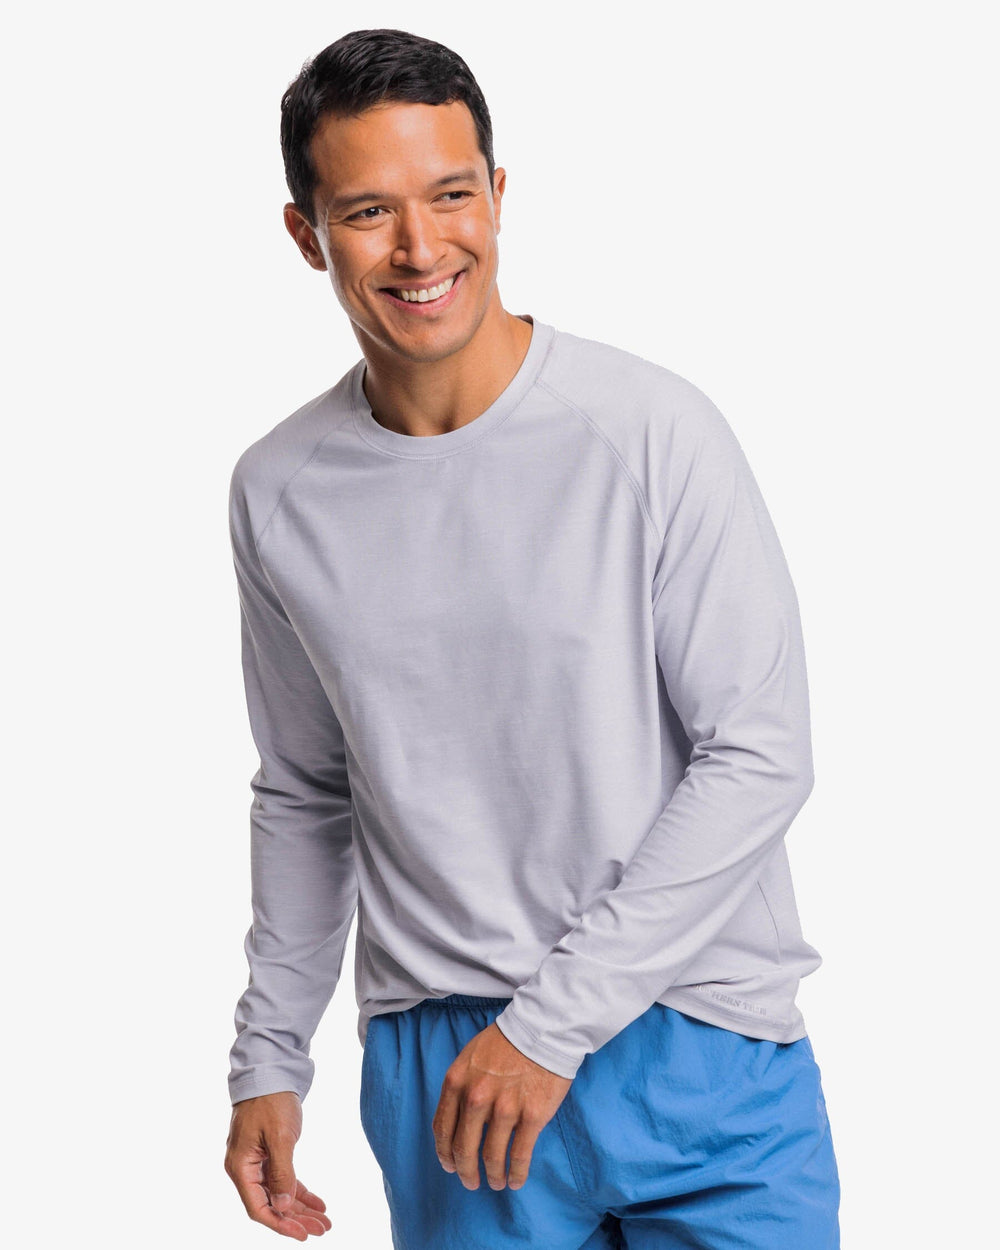 The front view of the Southern Tide brrr-illiant Performance Long Sleeve Tee by Southern Tide - Platinum Grey